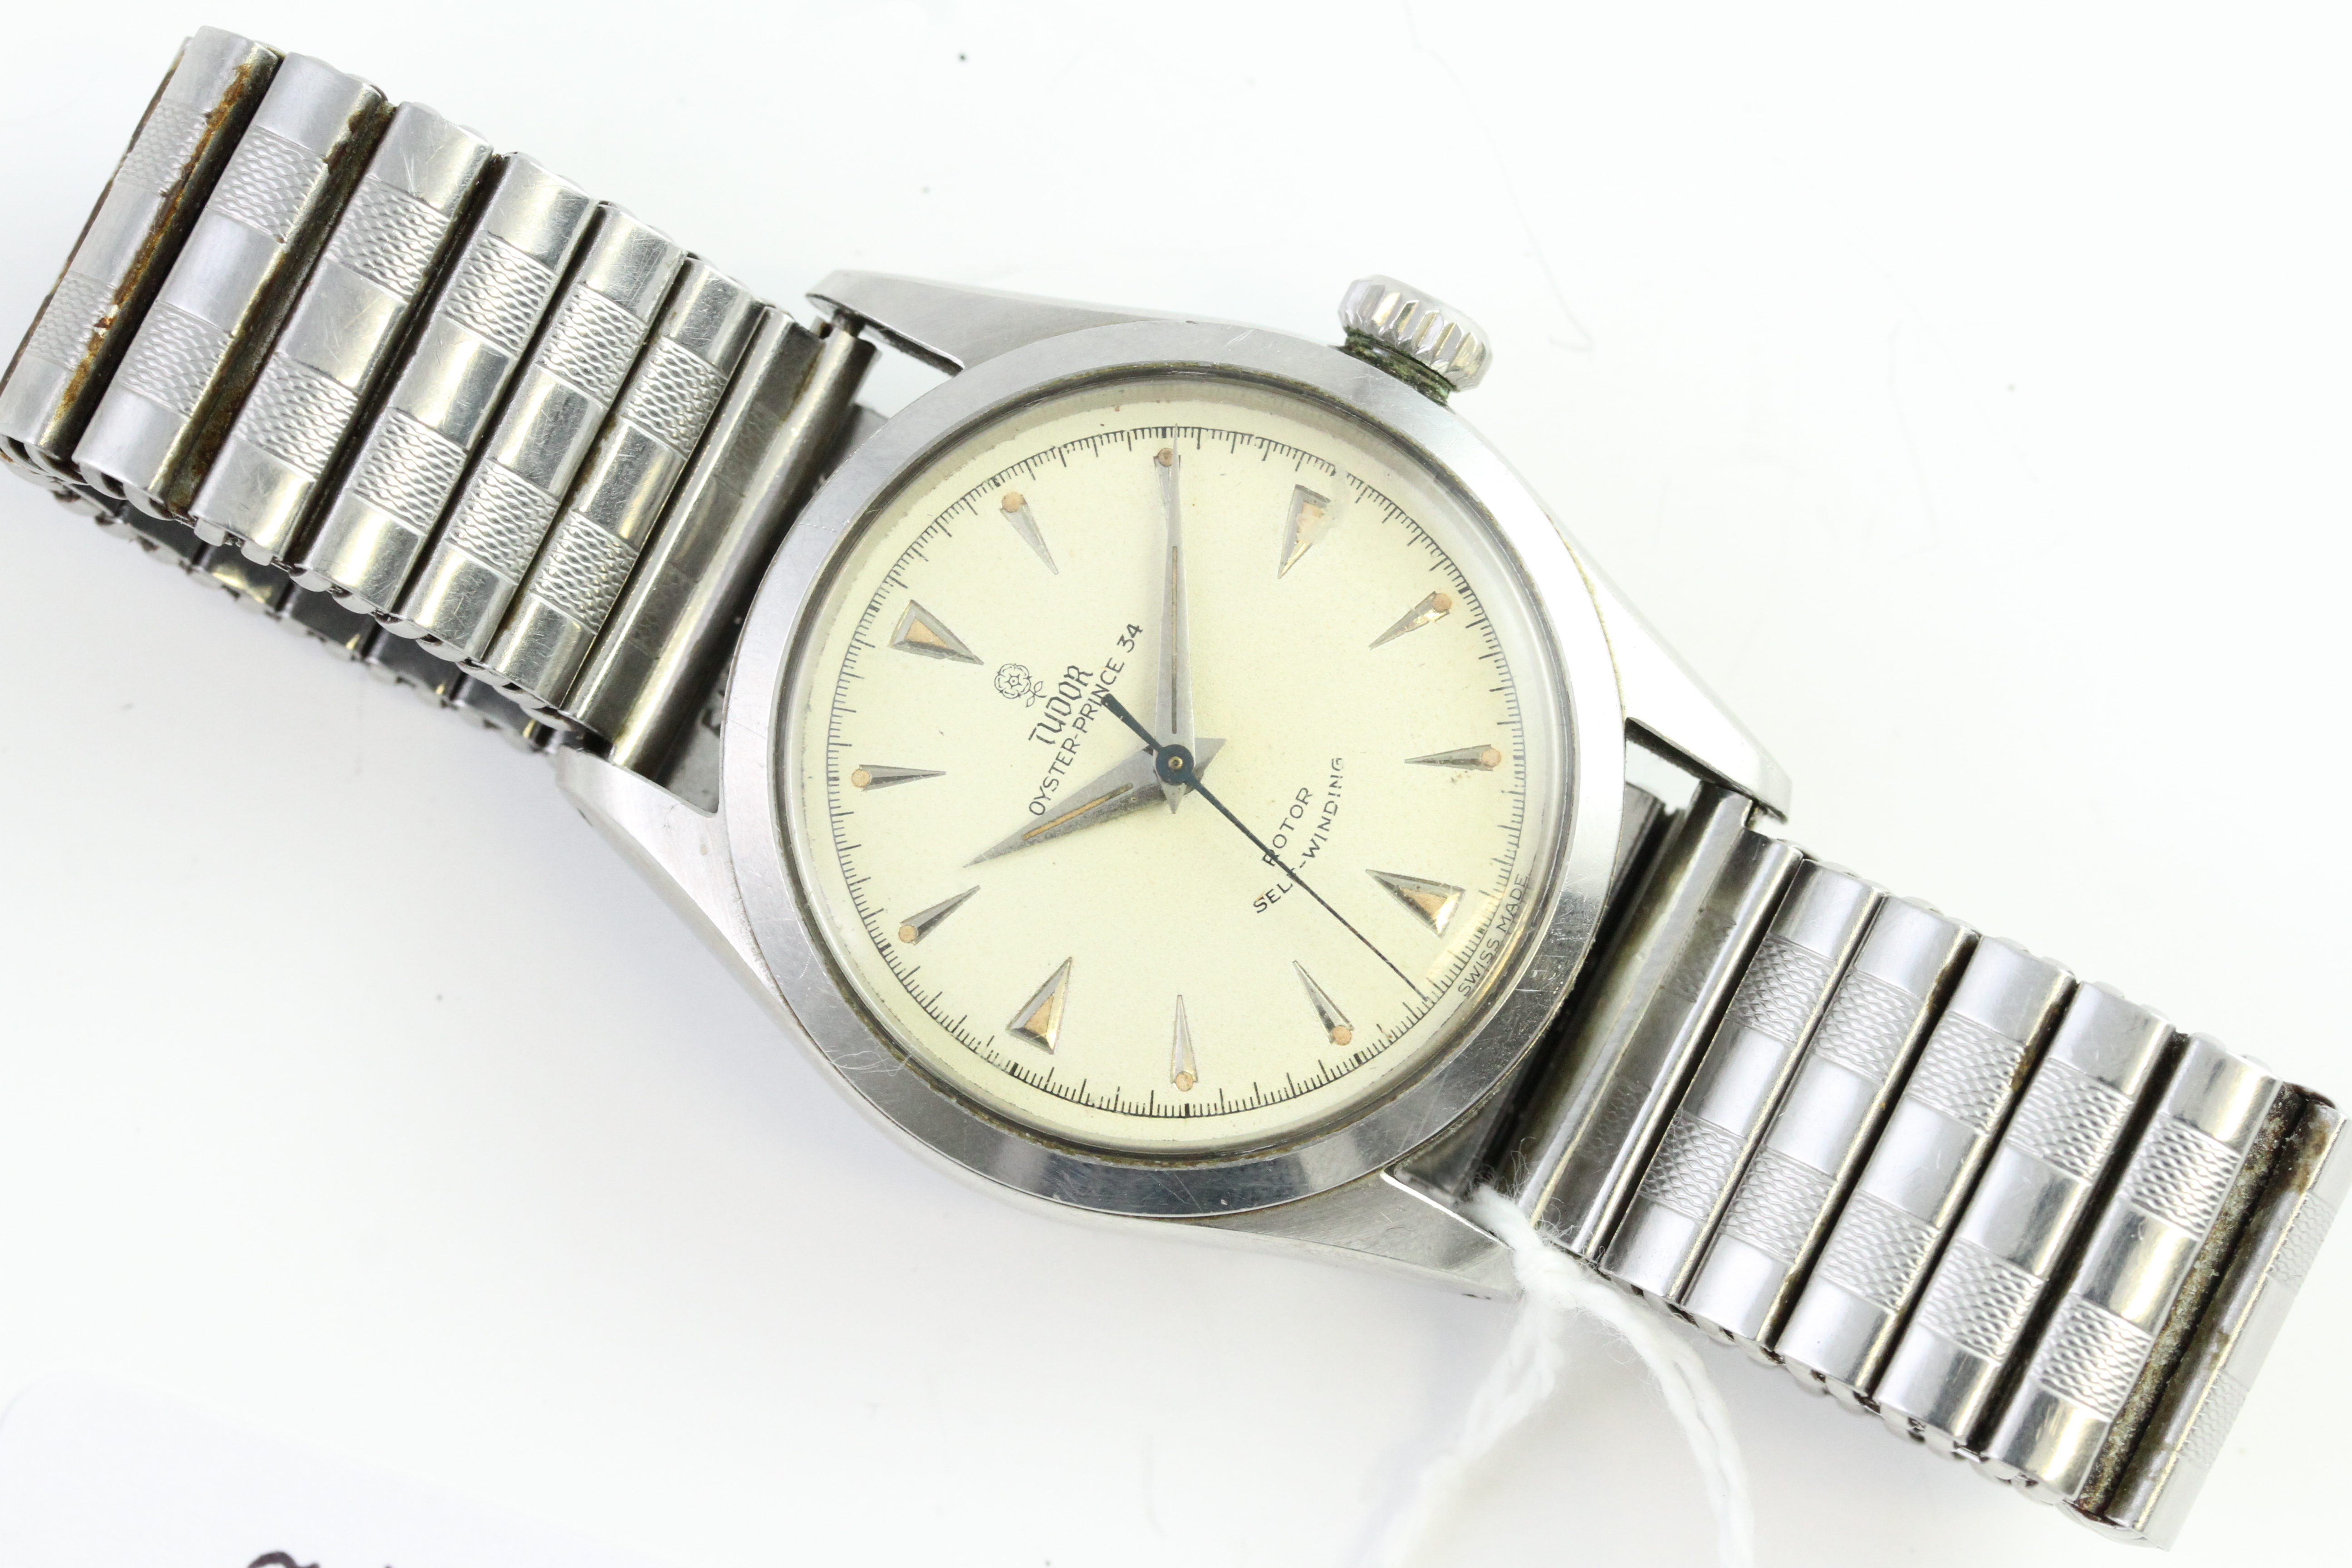 VINTAGE TUDOR OYSTER PRINCE 34 REFERENCE 7909, cream dial with dagger lume'd hour markers, outer